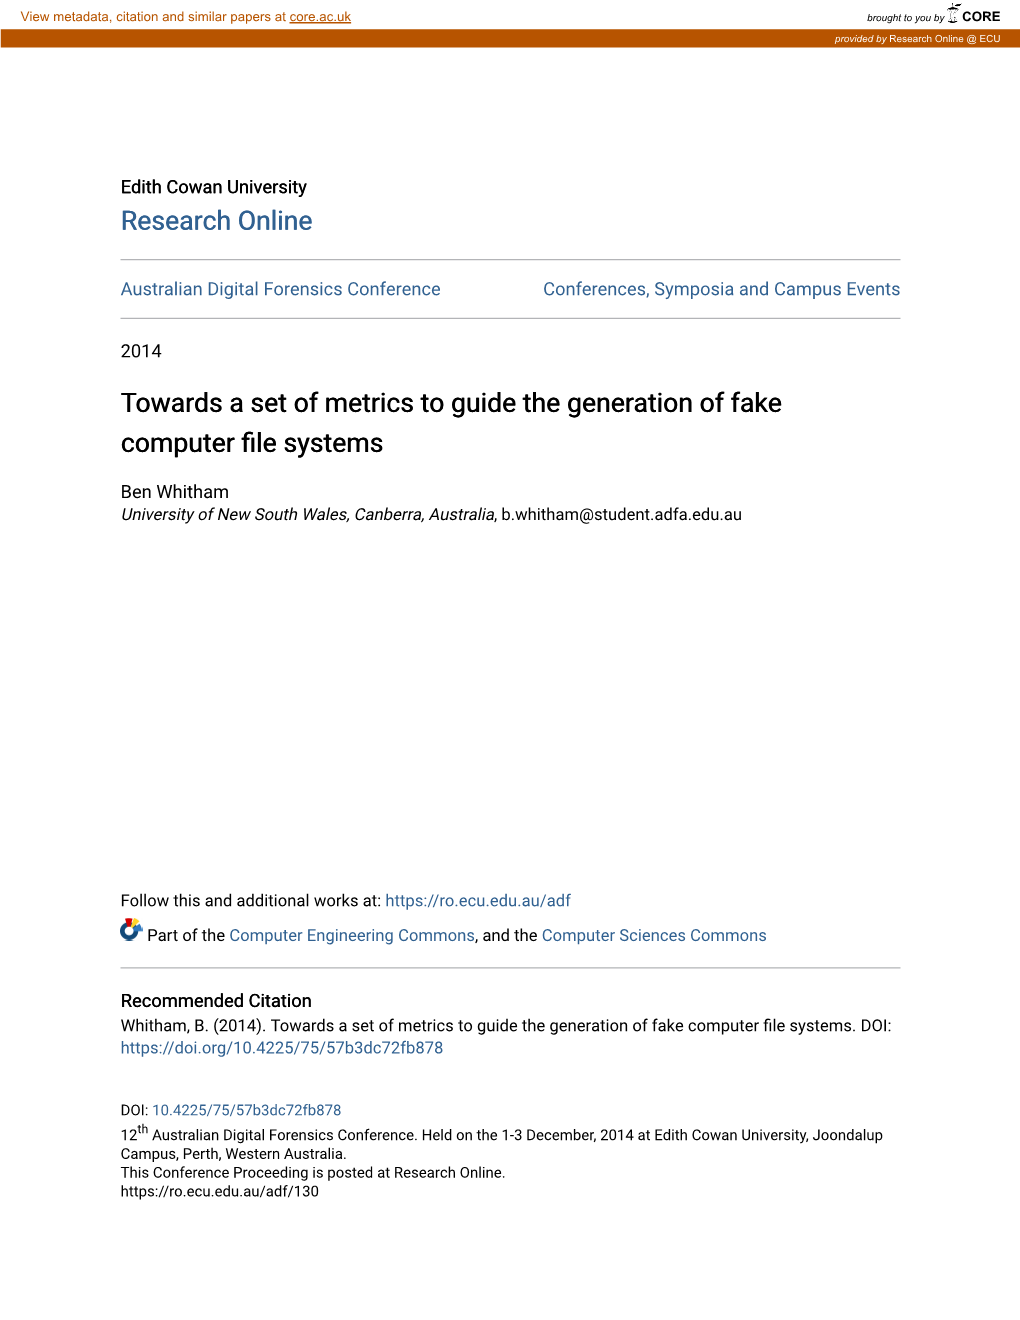 Towards a Set of Metrics to Guide the Generation of Fake Computer File Systems